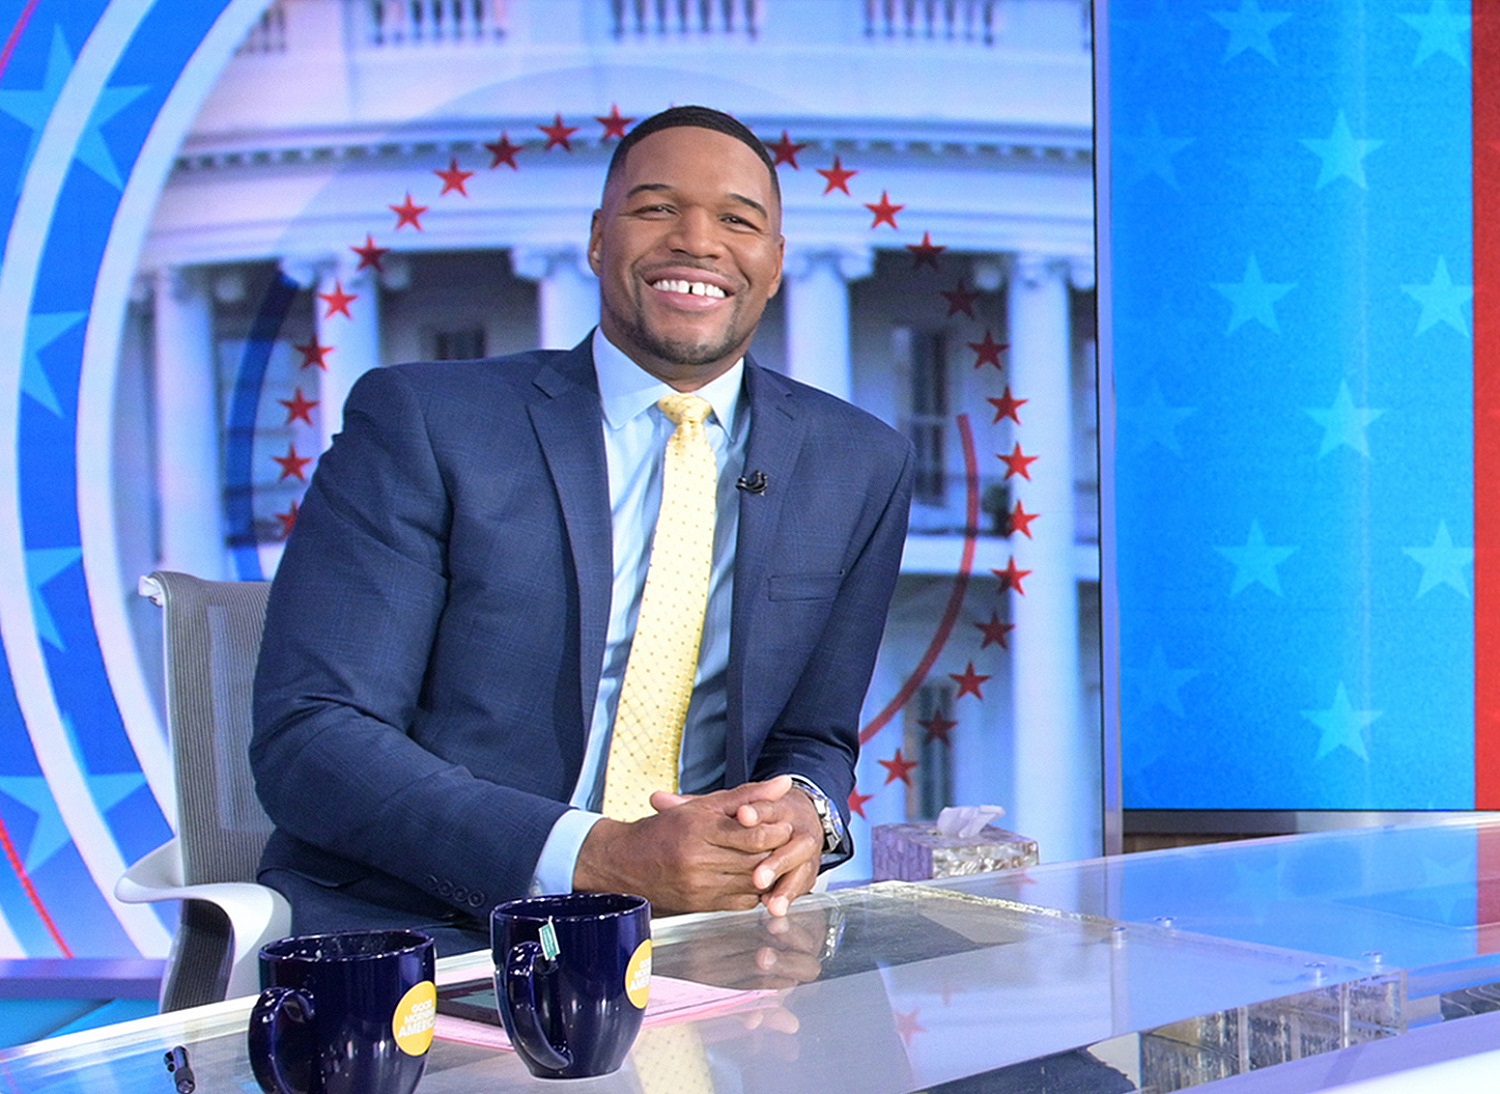 Michael Strahan's various duties at ABC have included coverage of Inauguration Day on Good Morning America.